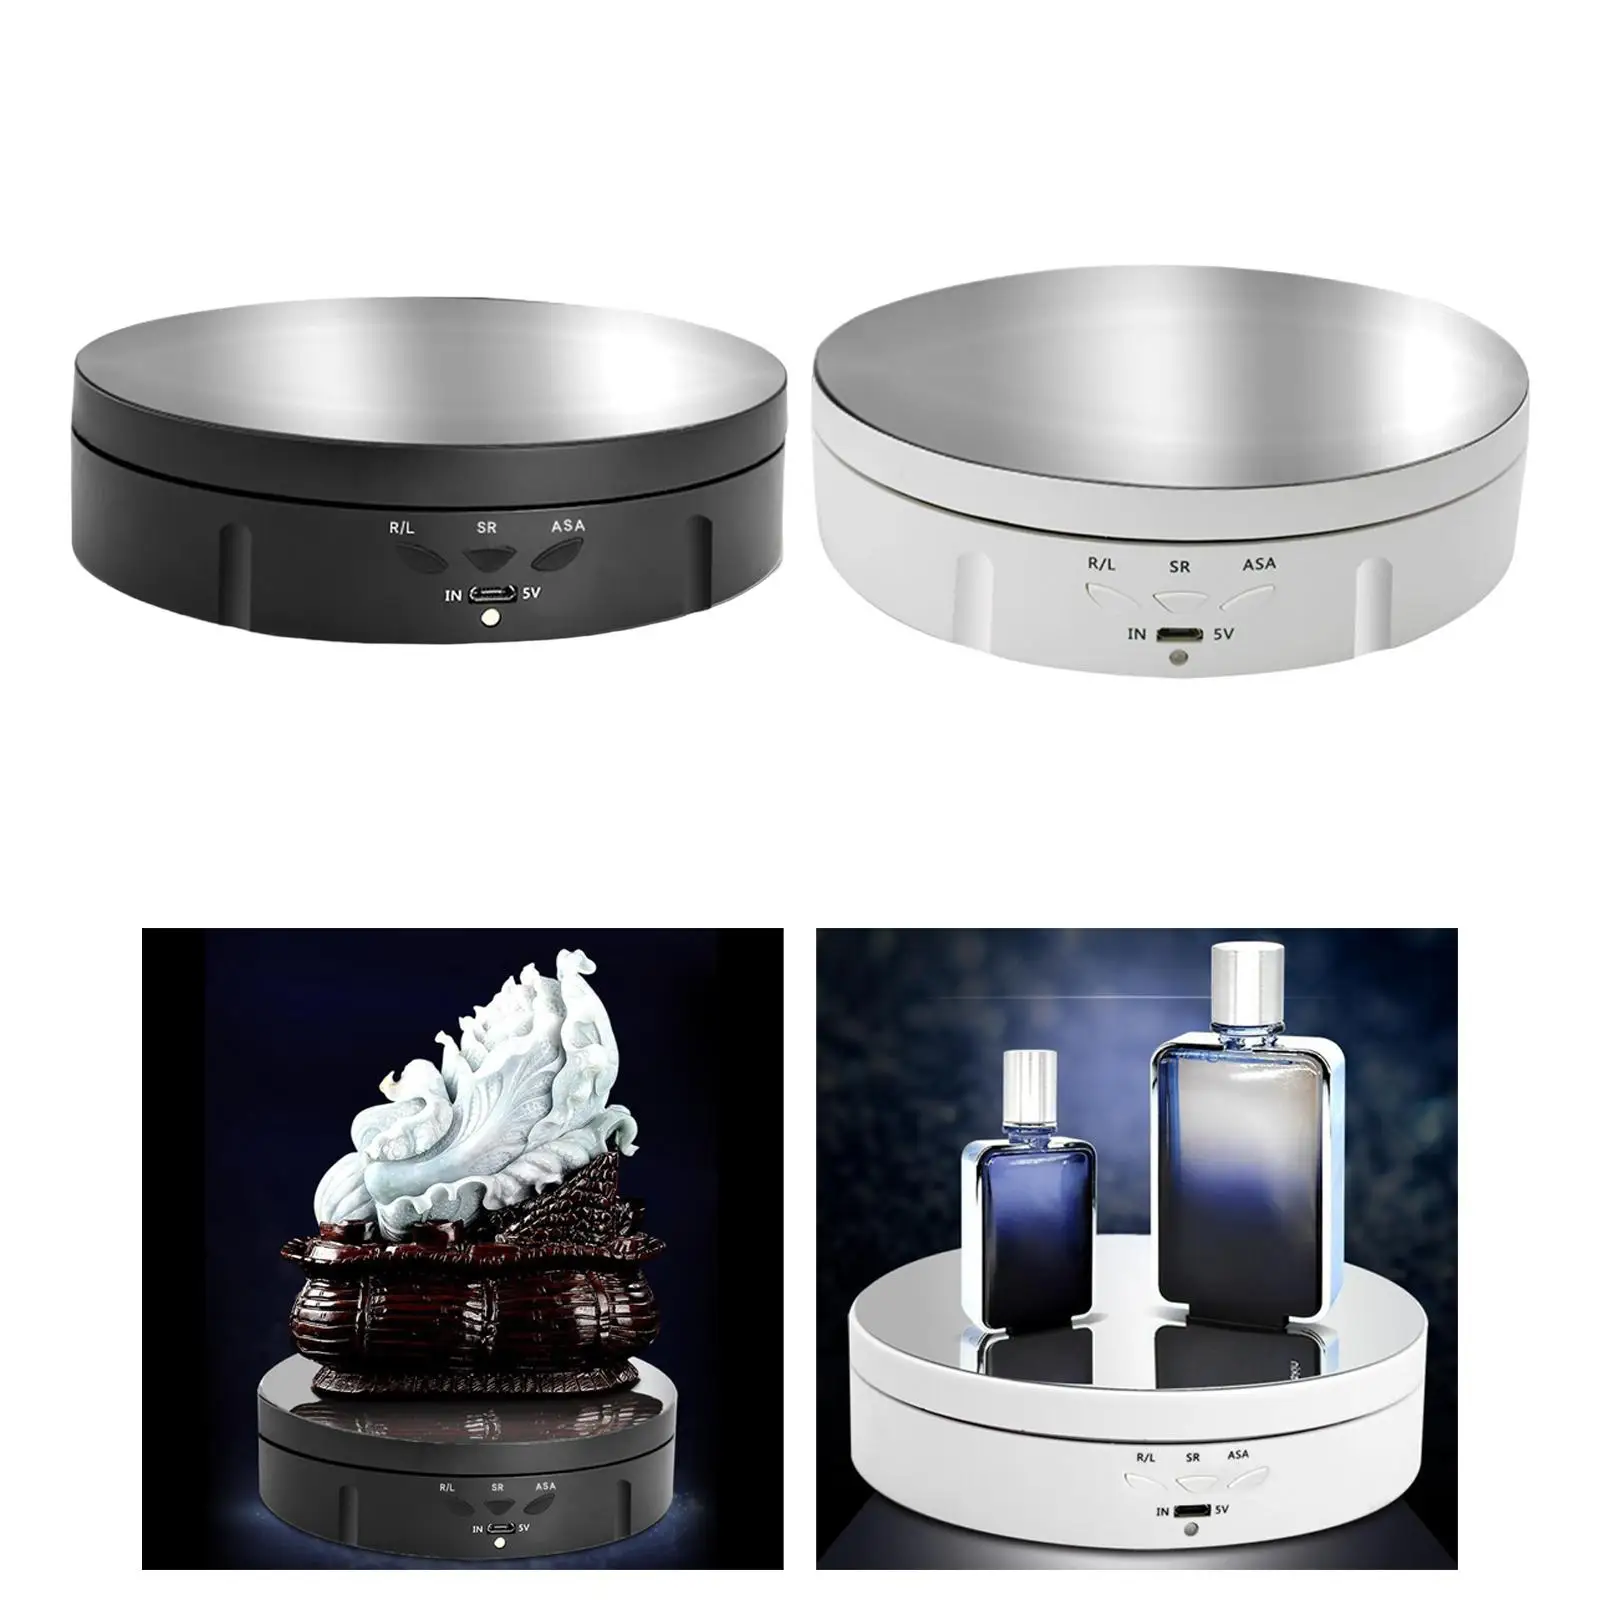 360 Degree Motorized Rotating Display Stand Electronic Rotating Turntable Jewelry Holder for Photography Products Shows Jewelry